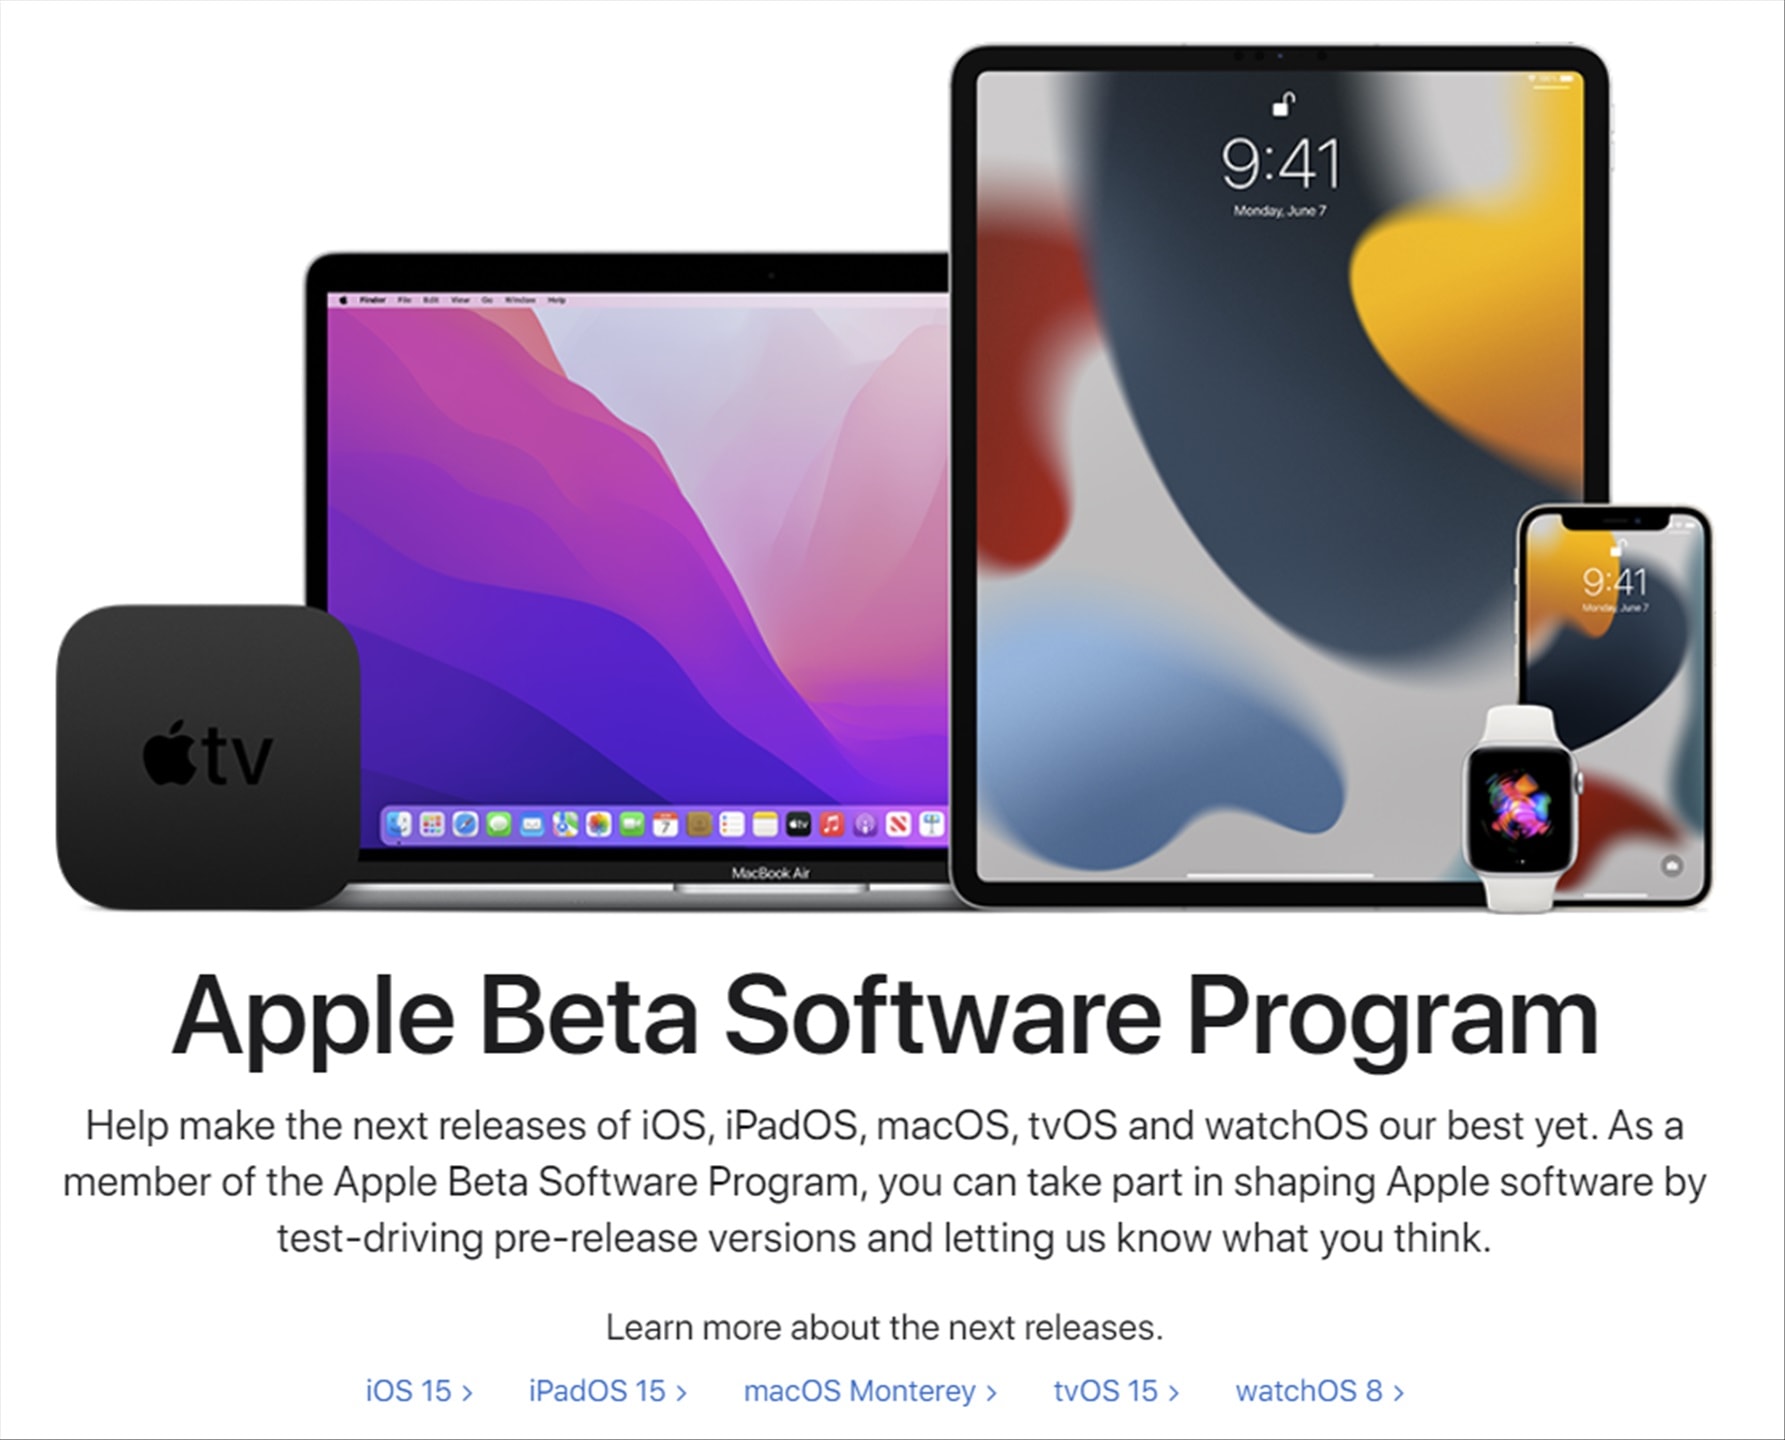 Apple beta software program download how to download play store in laptop windows 10